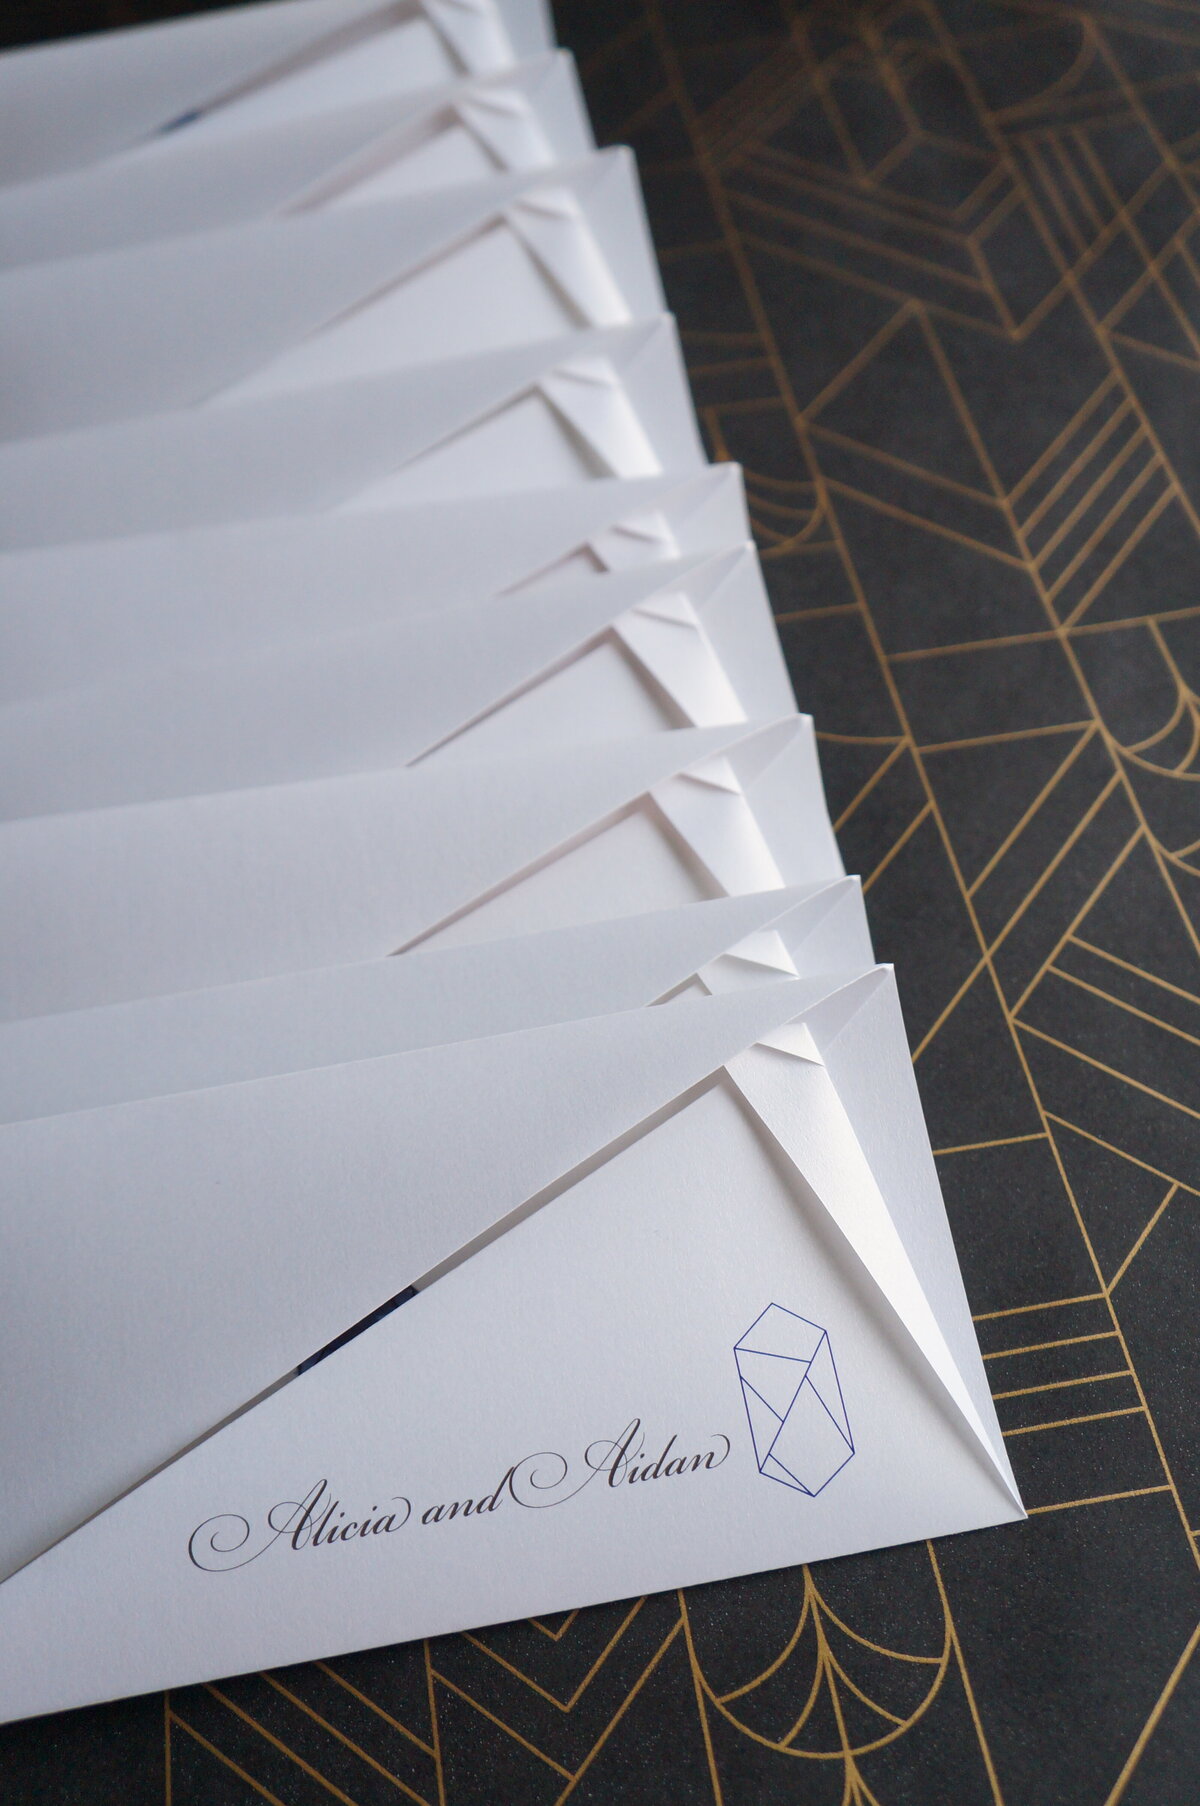 Origami wedding invitations with script font and graphic gemstone icon